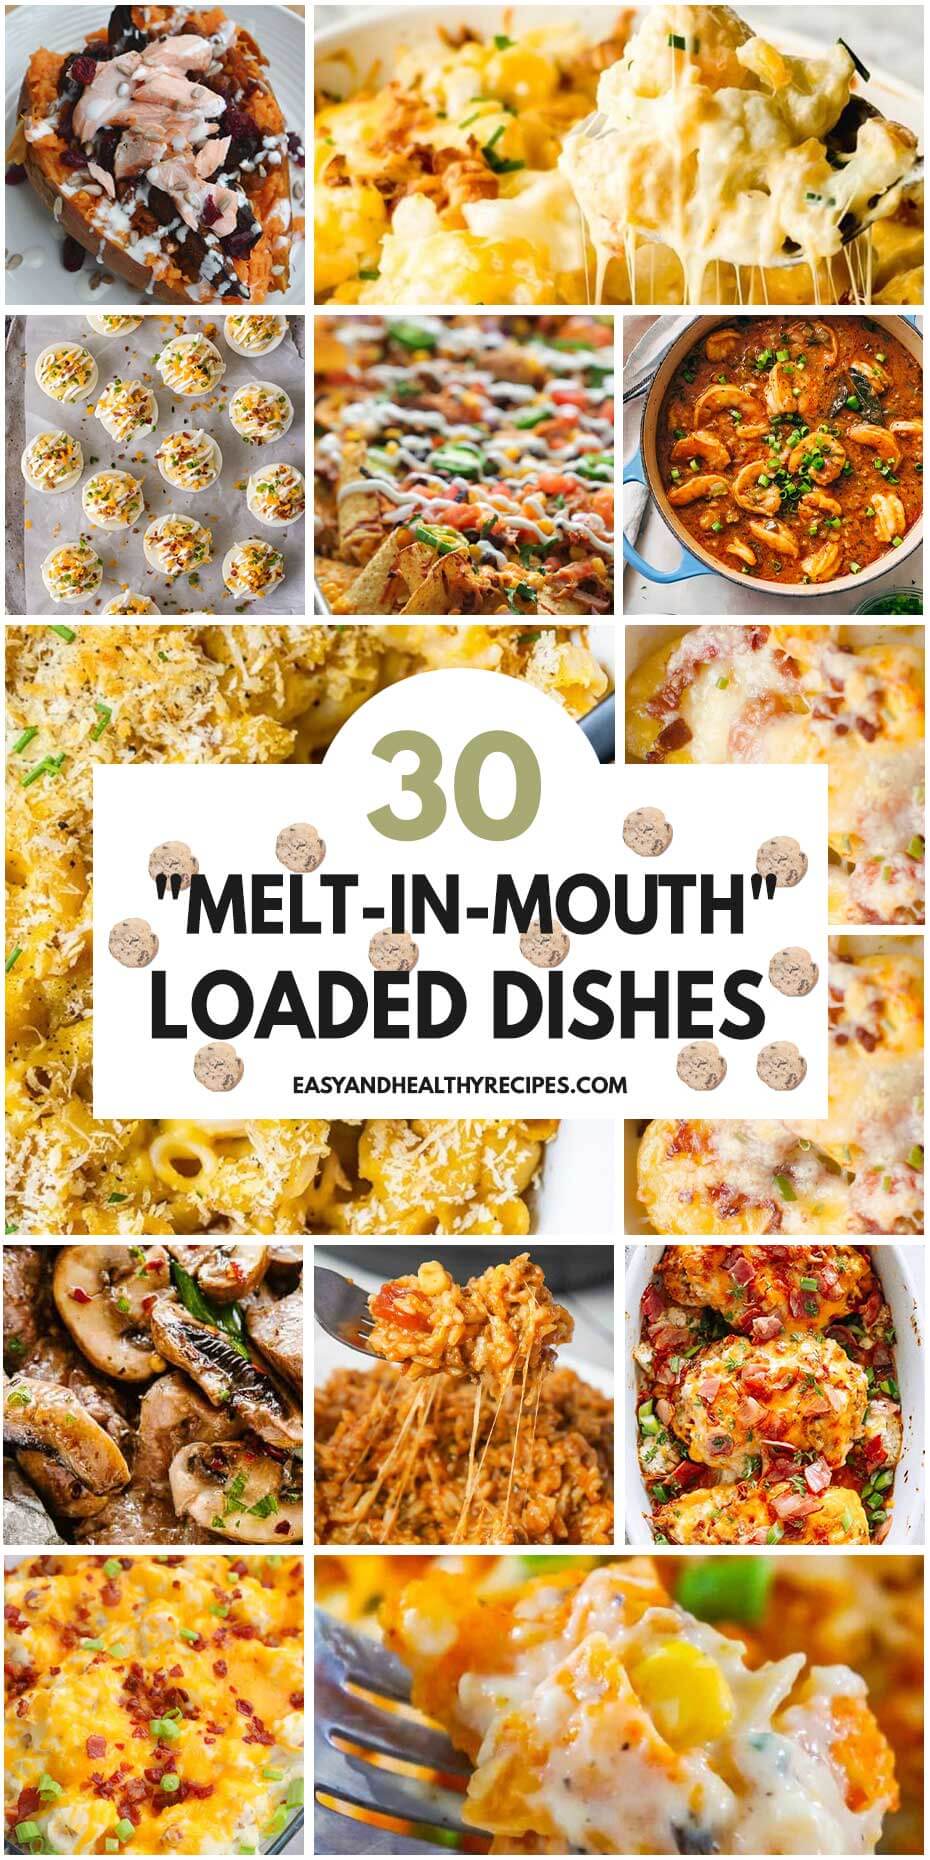 30 “Melt-in Mouth” Loaded Dishes